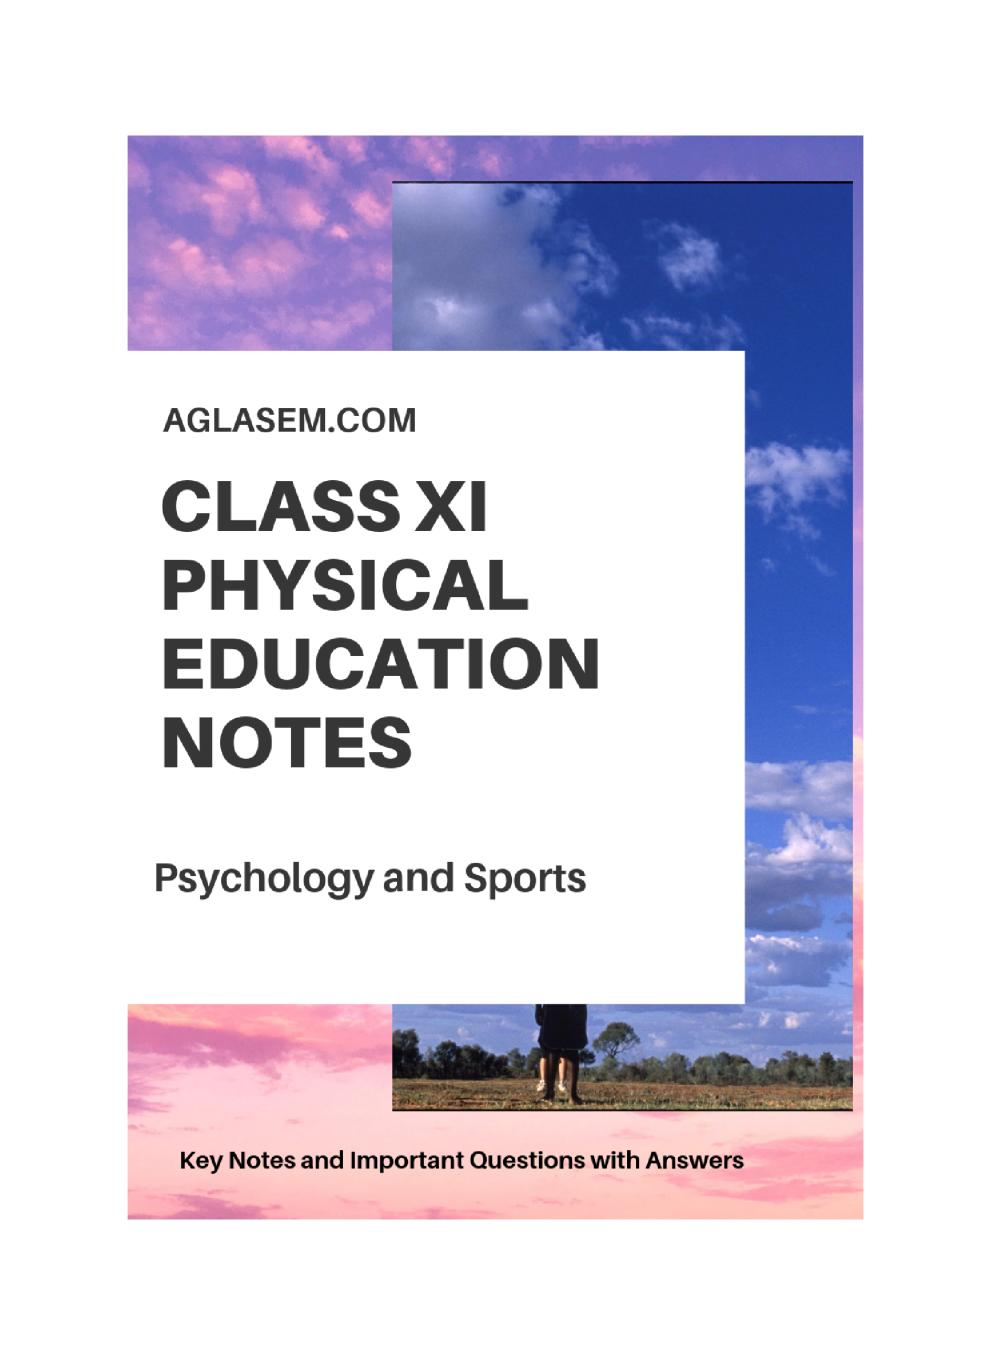 Class 11 Physical Education Notes for Psychology and Sports - Page 1